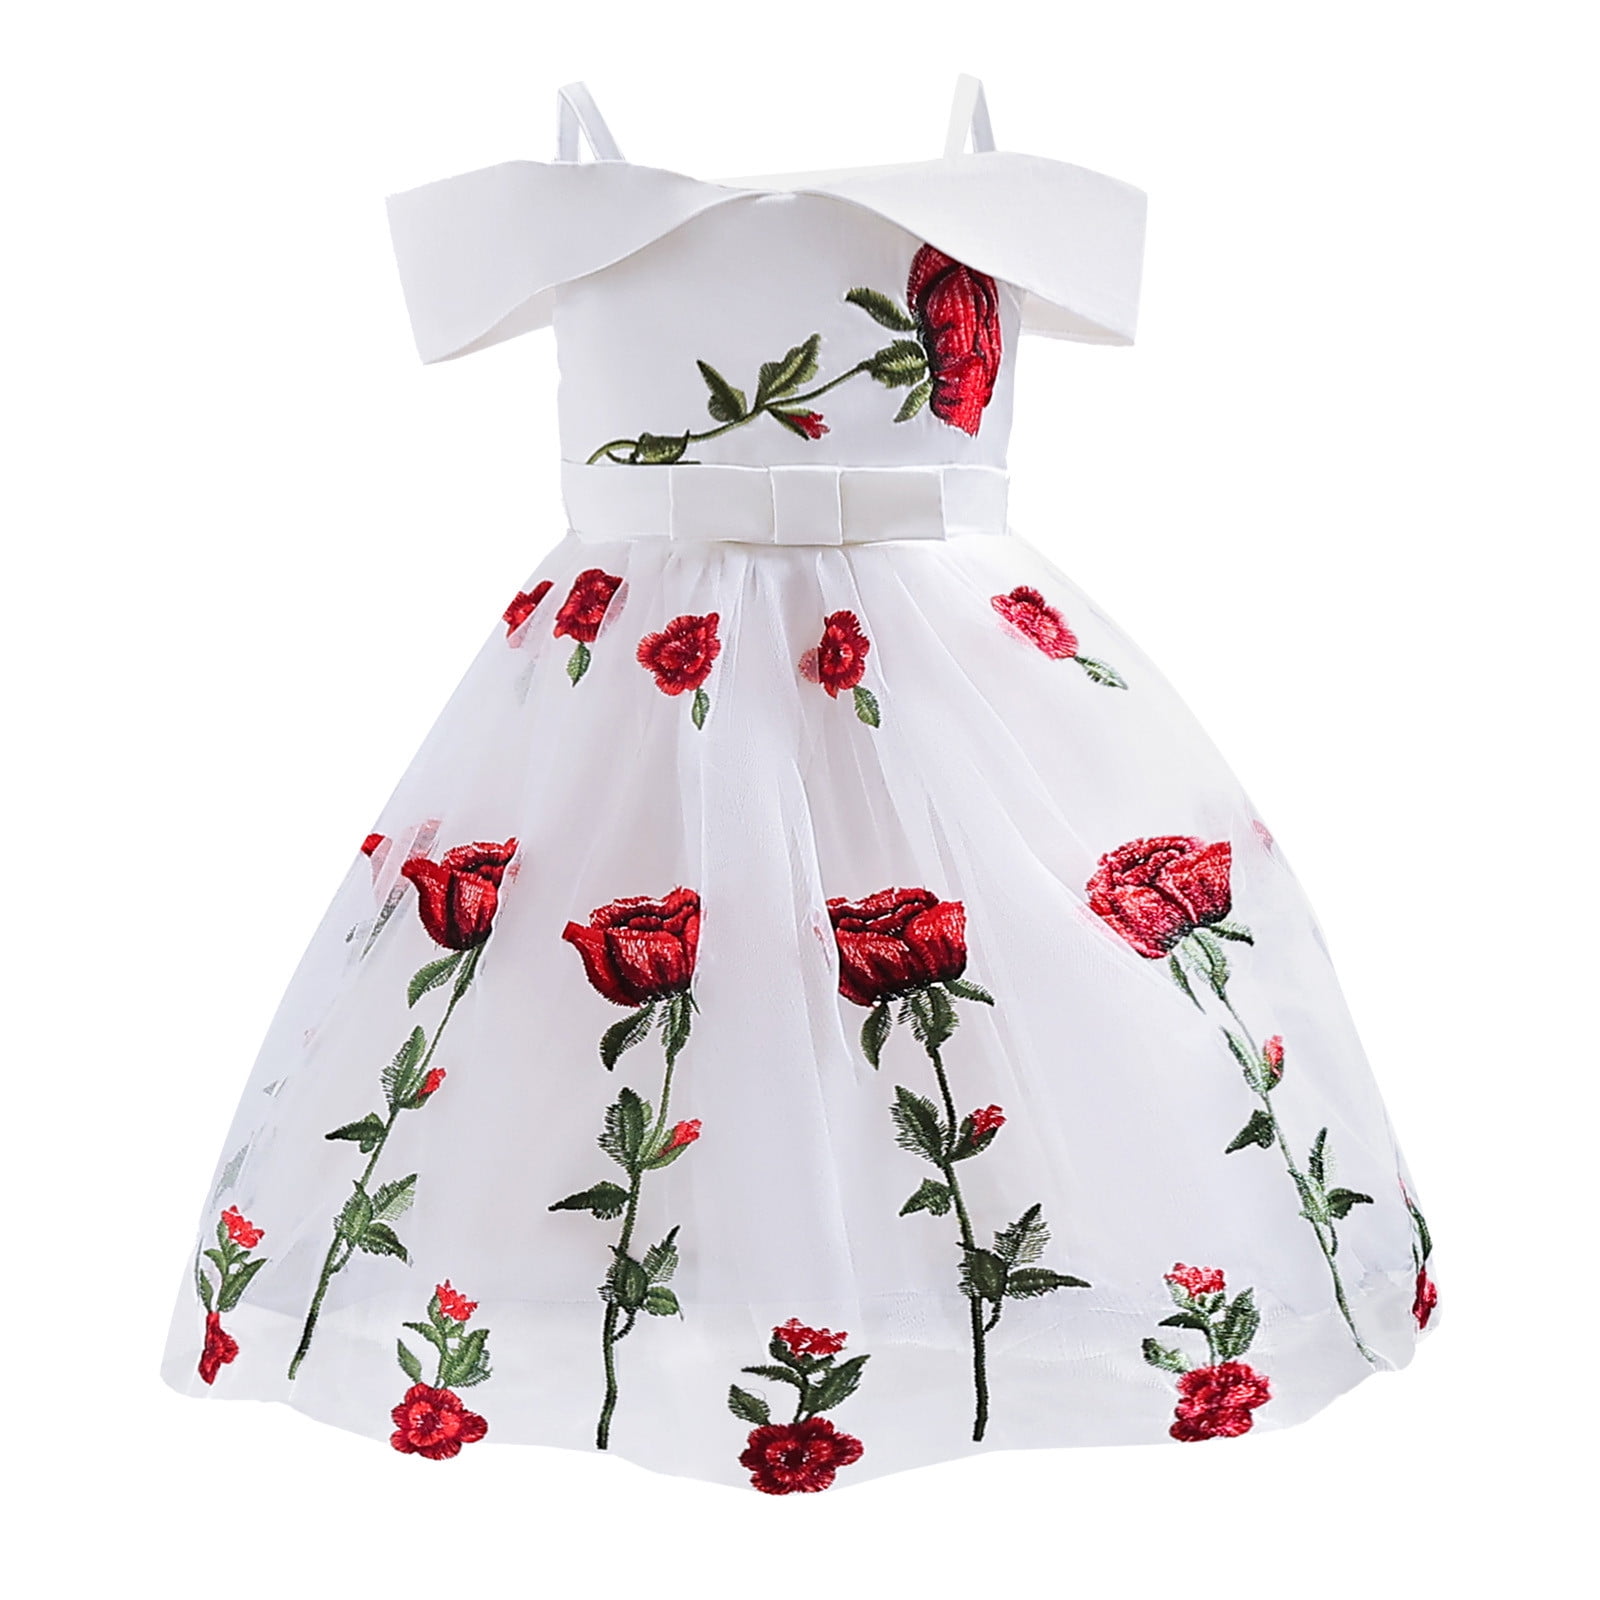 baby wish Girl Dress Knee Length Frock Floral Prints Girls Frocks Sleeve Dress  Girls Cotton Frock TOP Pink Rose Two Side Pocket (4-5 Years) : Amazon.in:  Clothing & Accessories